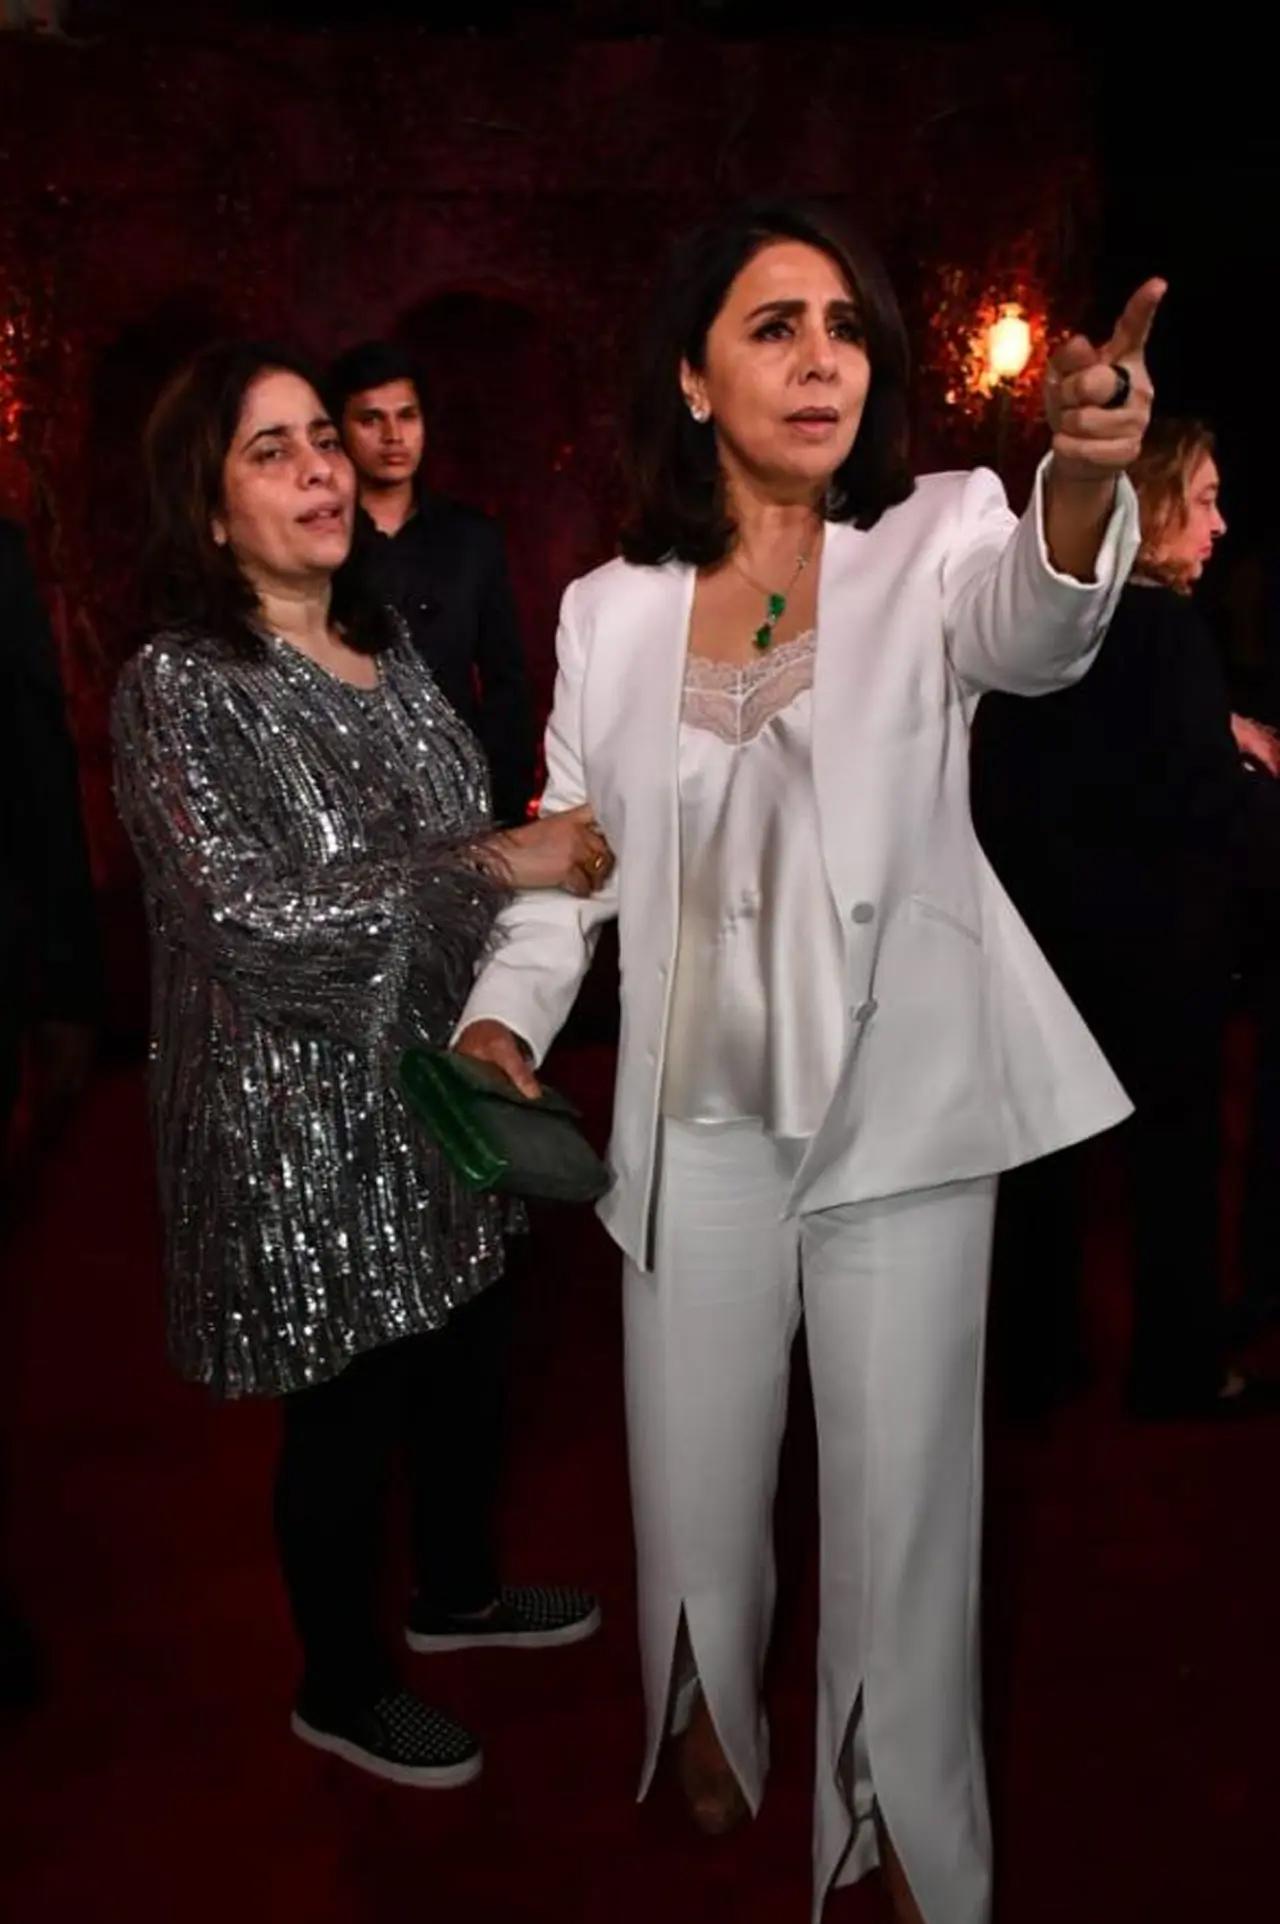 Neetu Kapoor nailed her white suit for the bash but what exactly was happening over here? Any guesses?